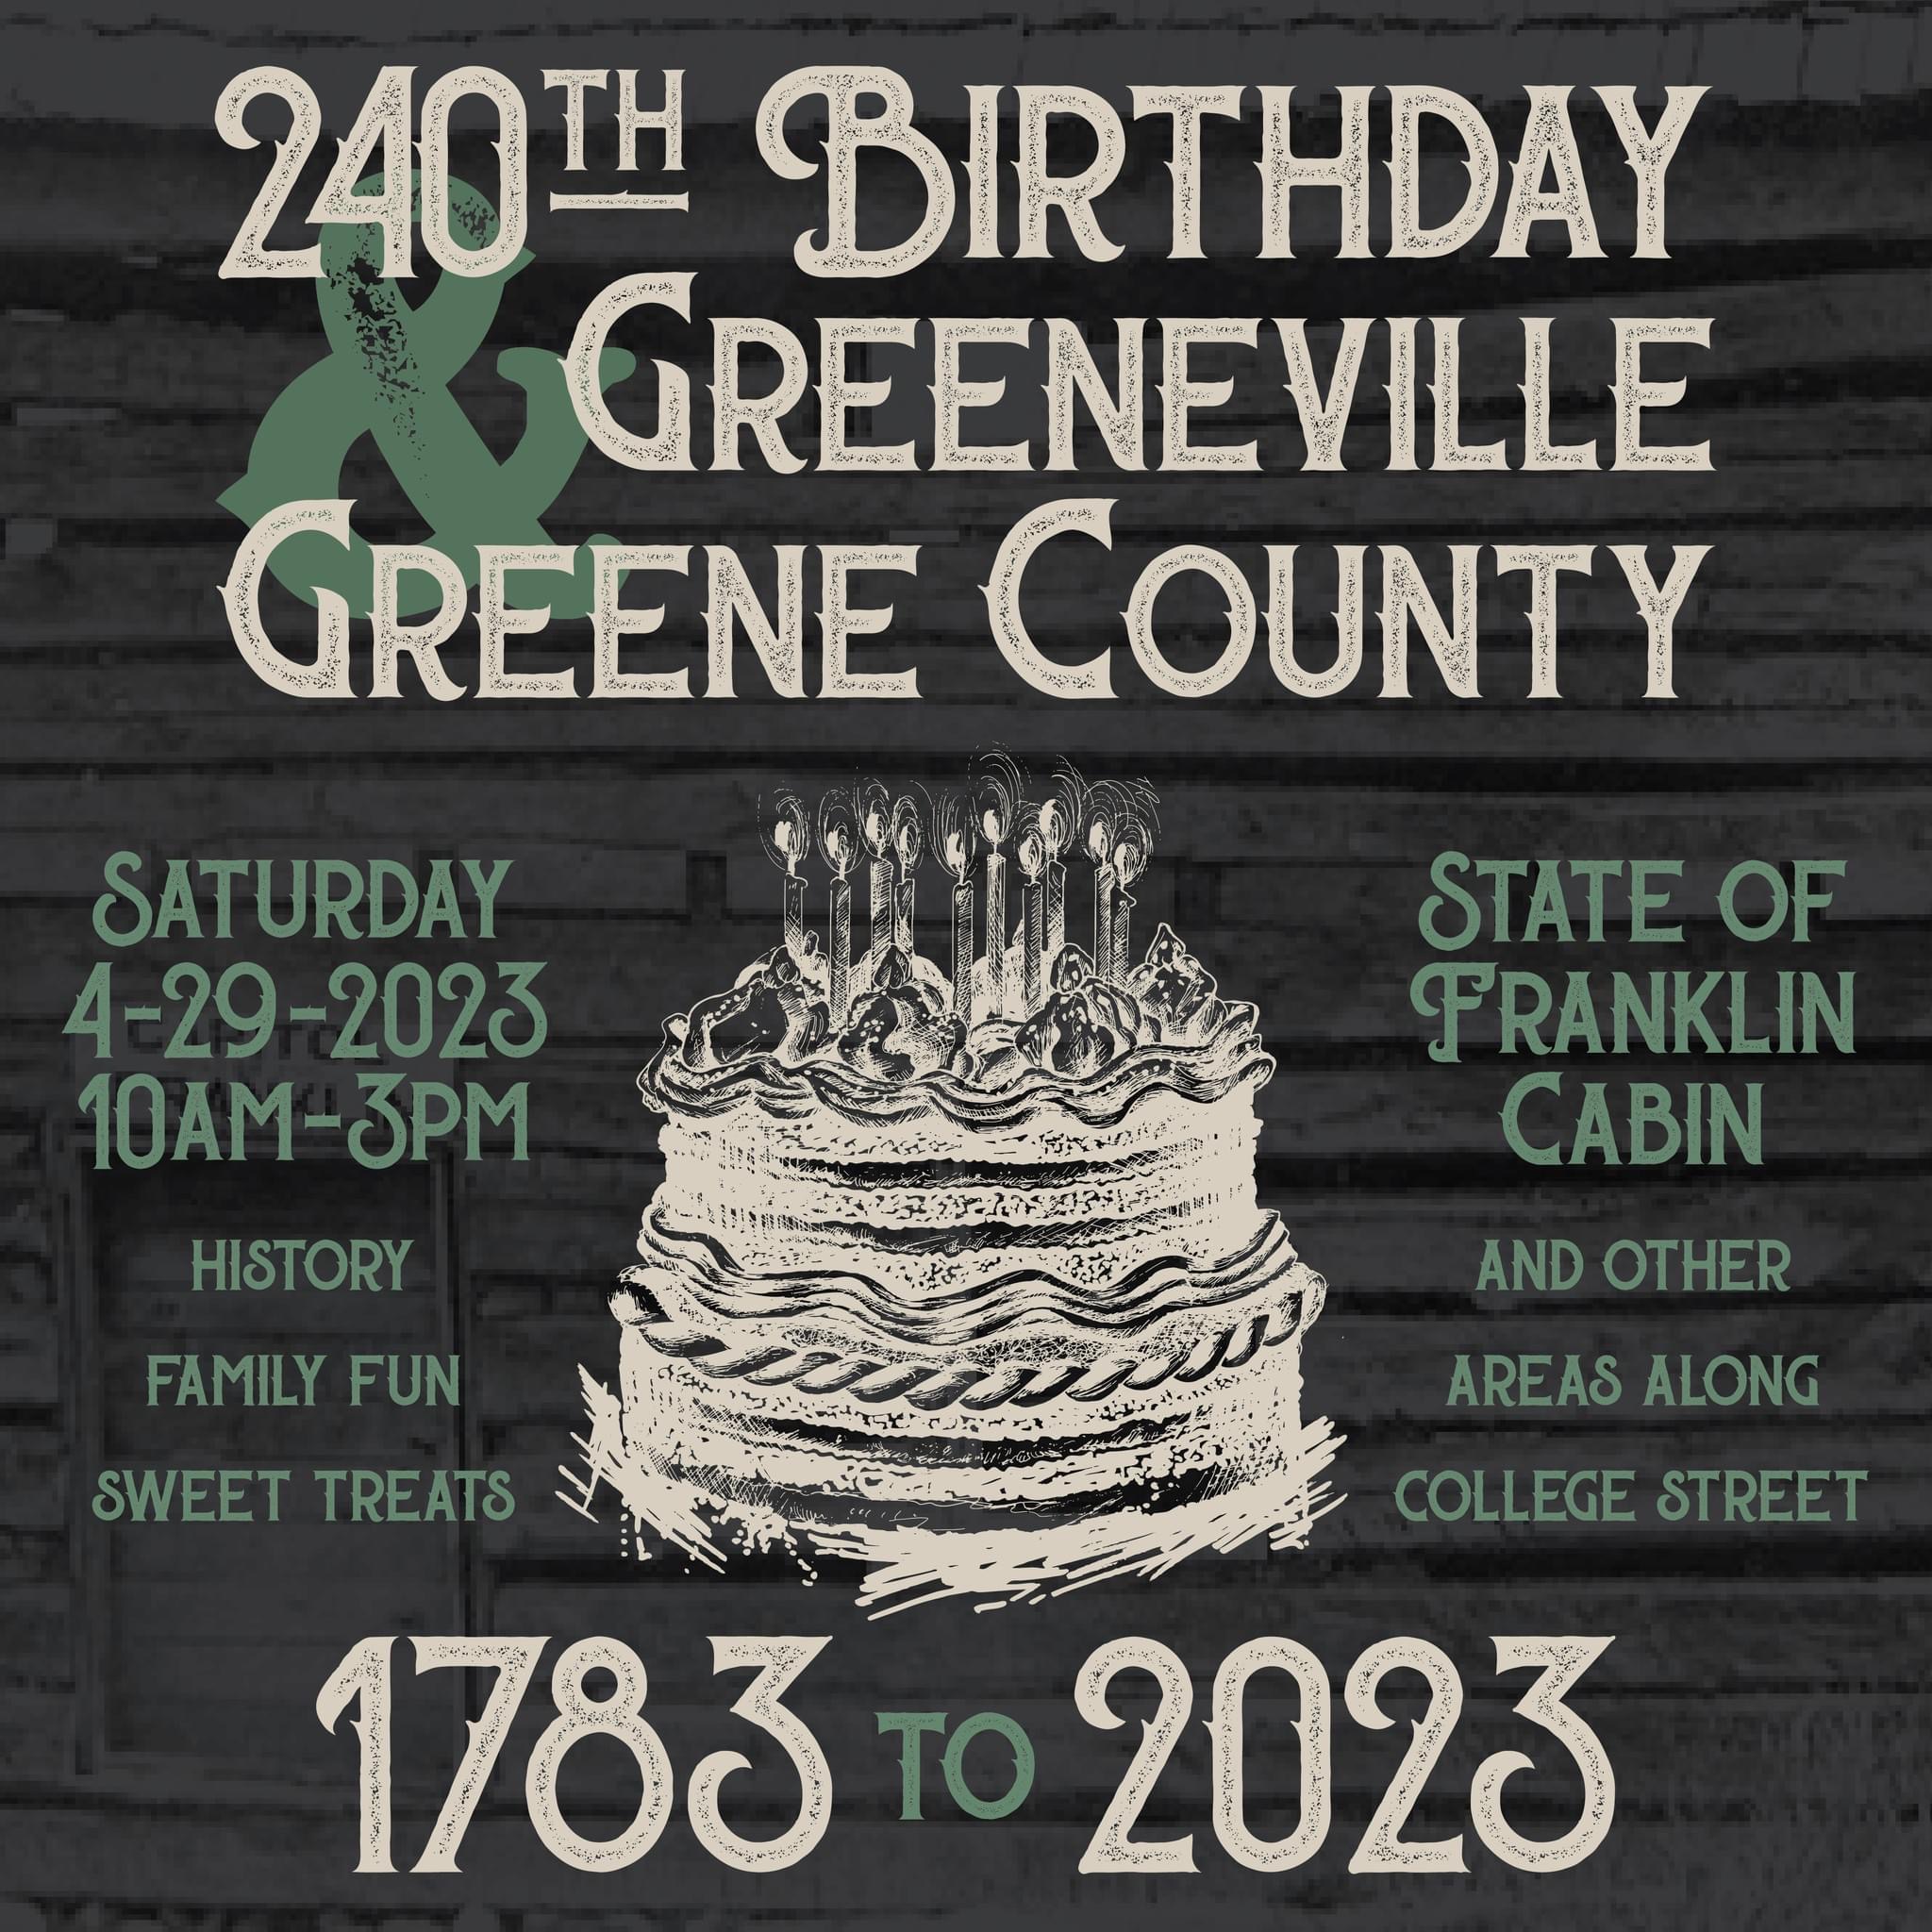 240th Birthday Celebration For Greeneville And Greene County